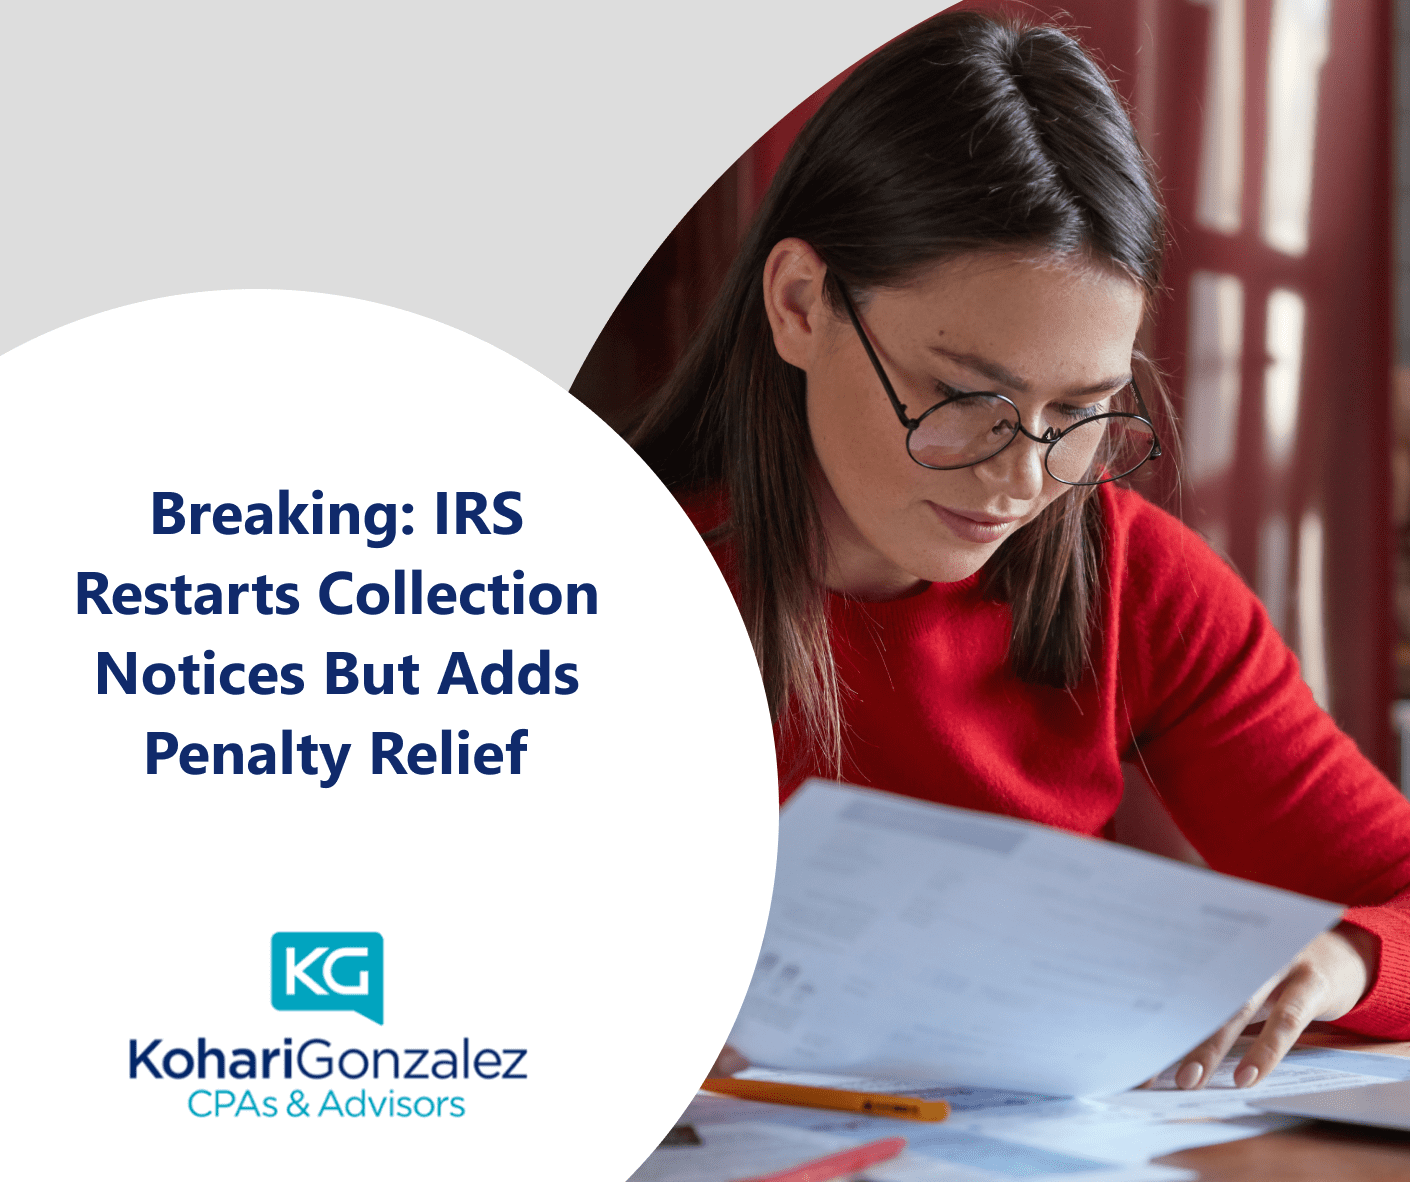 Breaking IRS Restarts Collection Notices But Adds Penalty Relief